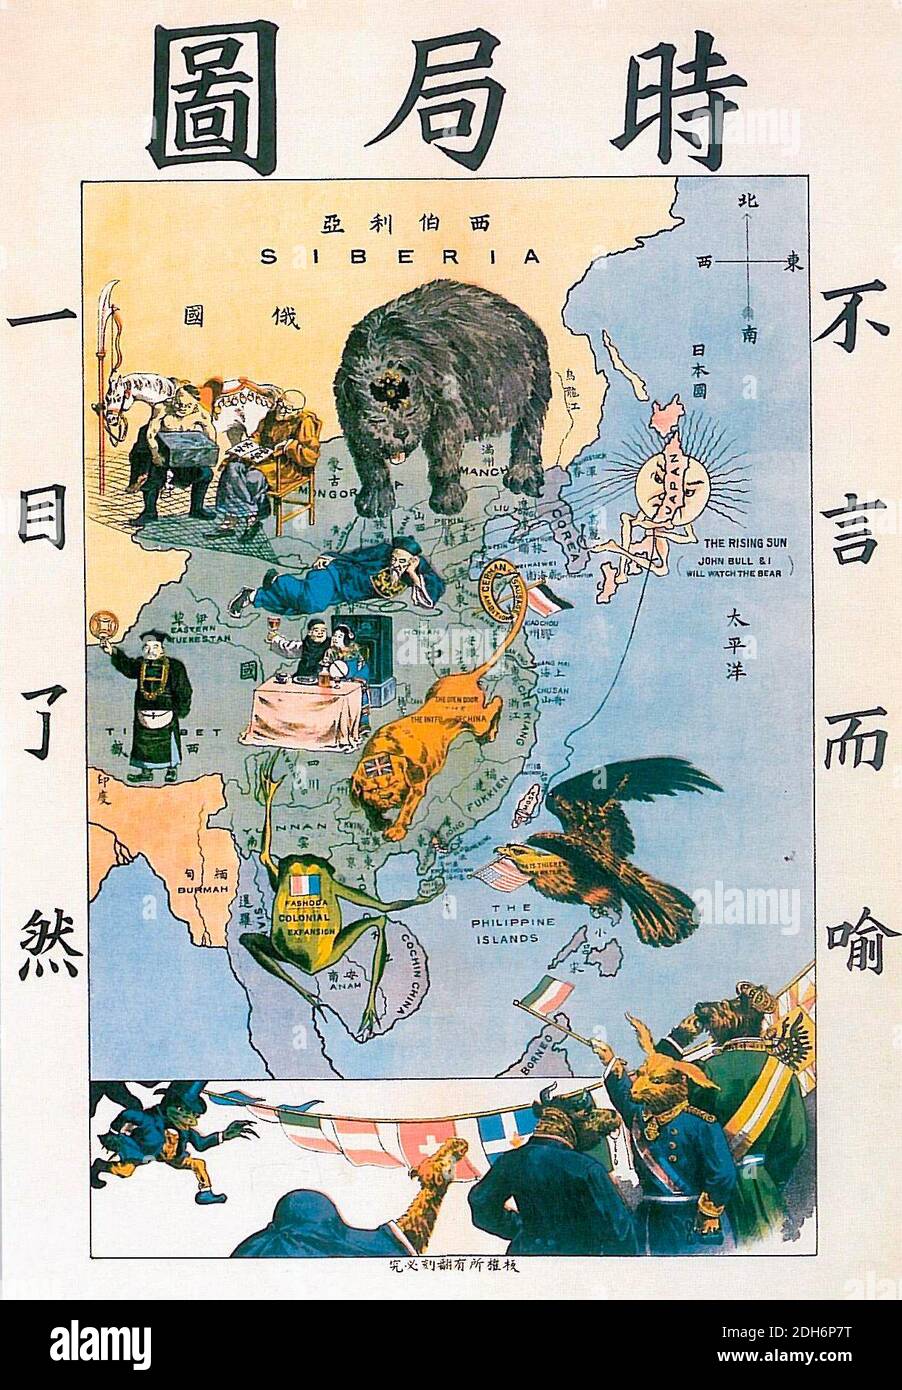 The Situation in the Far East -  author Tse Tsan-tai,  depicted the western powers encroaching on China at the end of the nineteenth century in symbolic form. At the left to be clear at a glance, at the right, self-evident. The bear representing Russia is intruding from the north, the bulldog head with a lion body representing the United Kingdom is in south China, with its tail around the Shantung peninsula (Wehai english colony was the seat of the British bulldog in the first version of the cartoon), the Gallic frog is in southeast Asia, with an inscription 'Fashoda', in reference to Fashoda Stock Photo